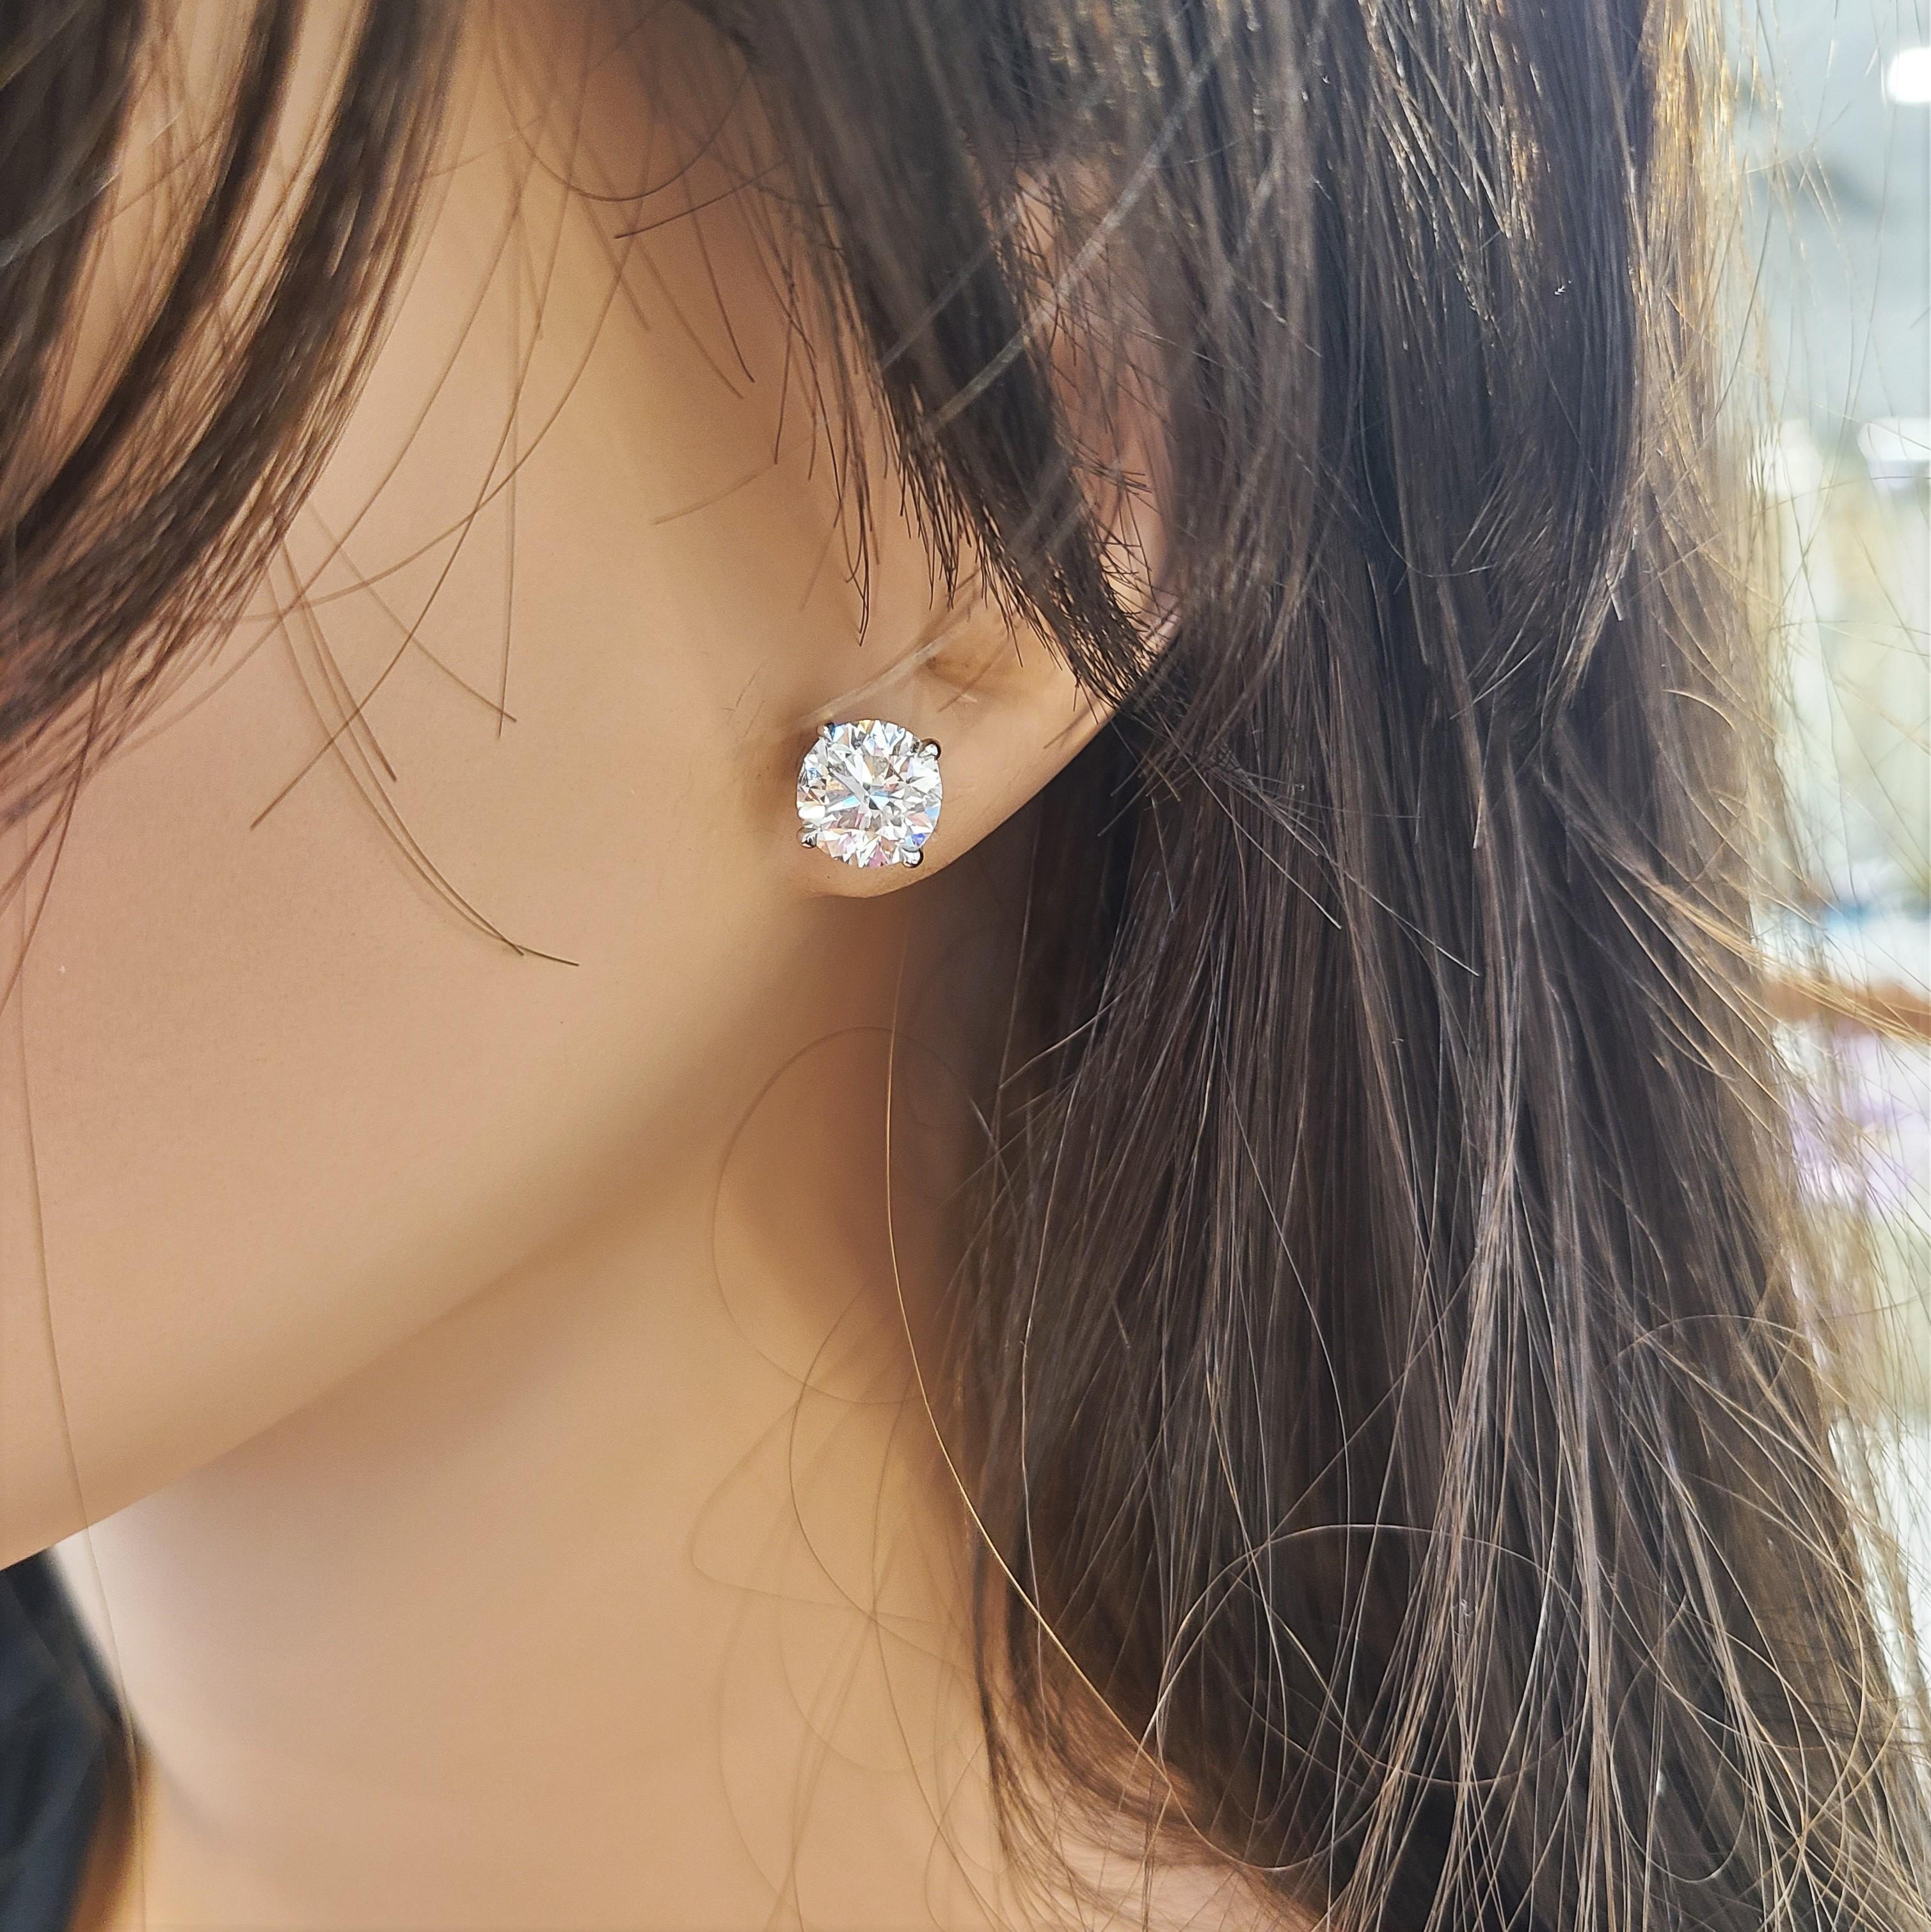 Stunning 14 Karat white gold handmade earrings featuring 2 round brilliant cut diamonds weighing 5.09 carat total J color VS1-VS2 clarity. The stunning earrings measure 8.54 - 8.50 mm in diameter, these gorgeous earrings are classic and timelessly